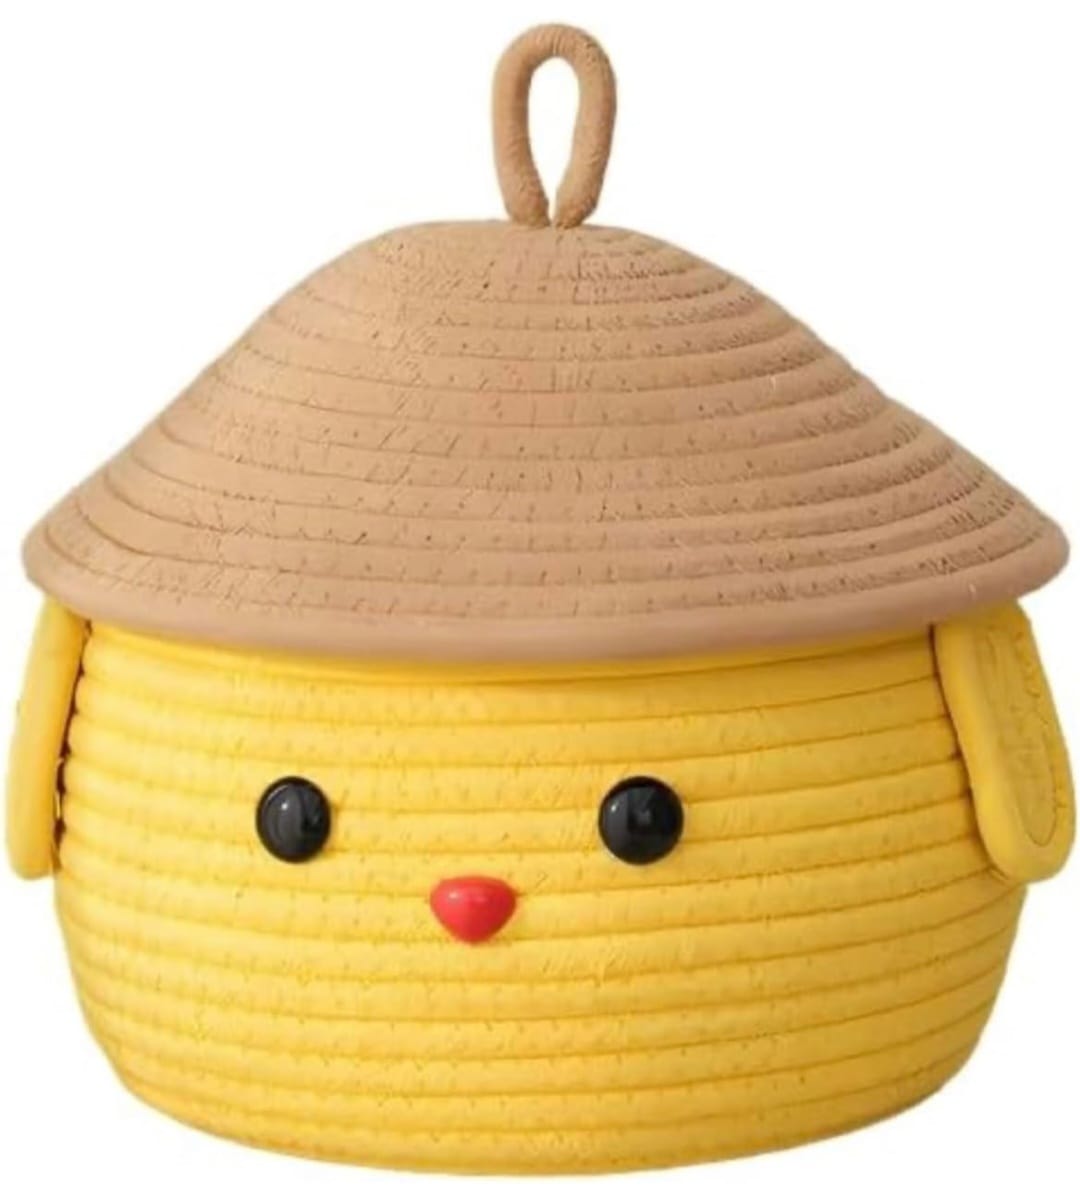 Round Woven Handcrafted Jute Cartoon Basket Organizer* for Kids, Toys, Laundry, baby clothes, hamper, Wardrobe, Plants etc - Best for Kids